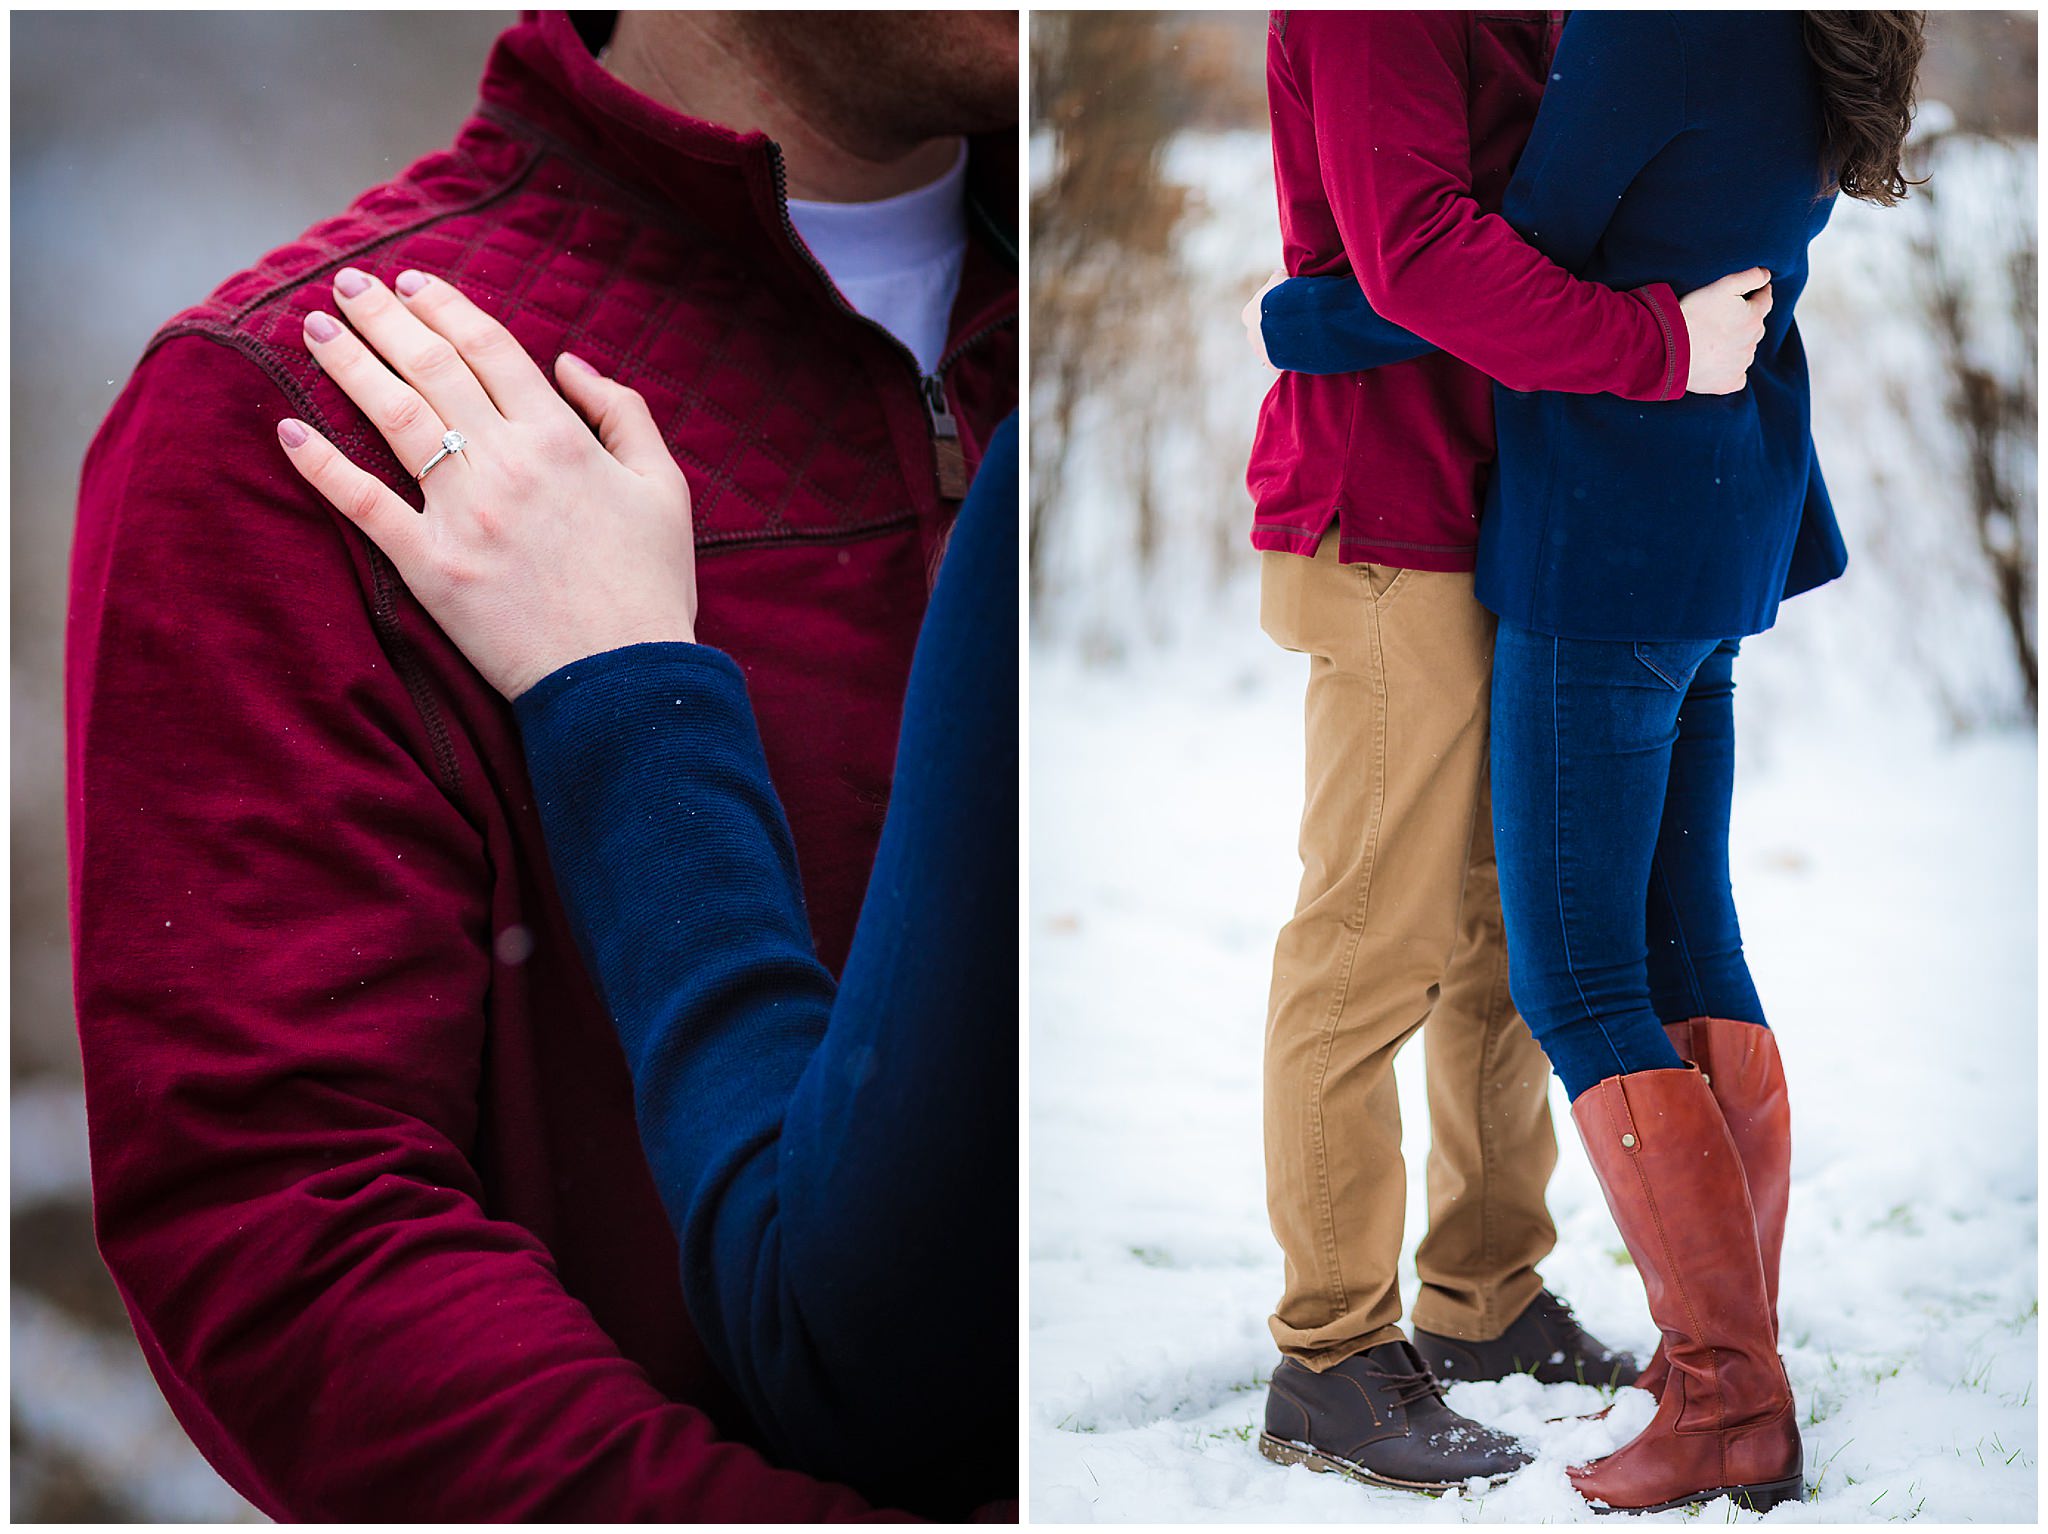 Engagement session at Point State Park